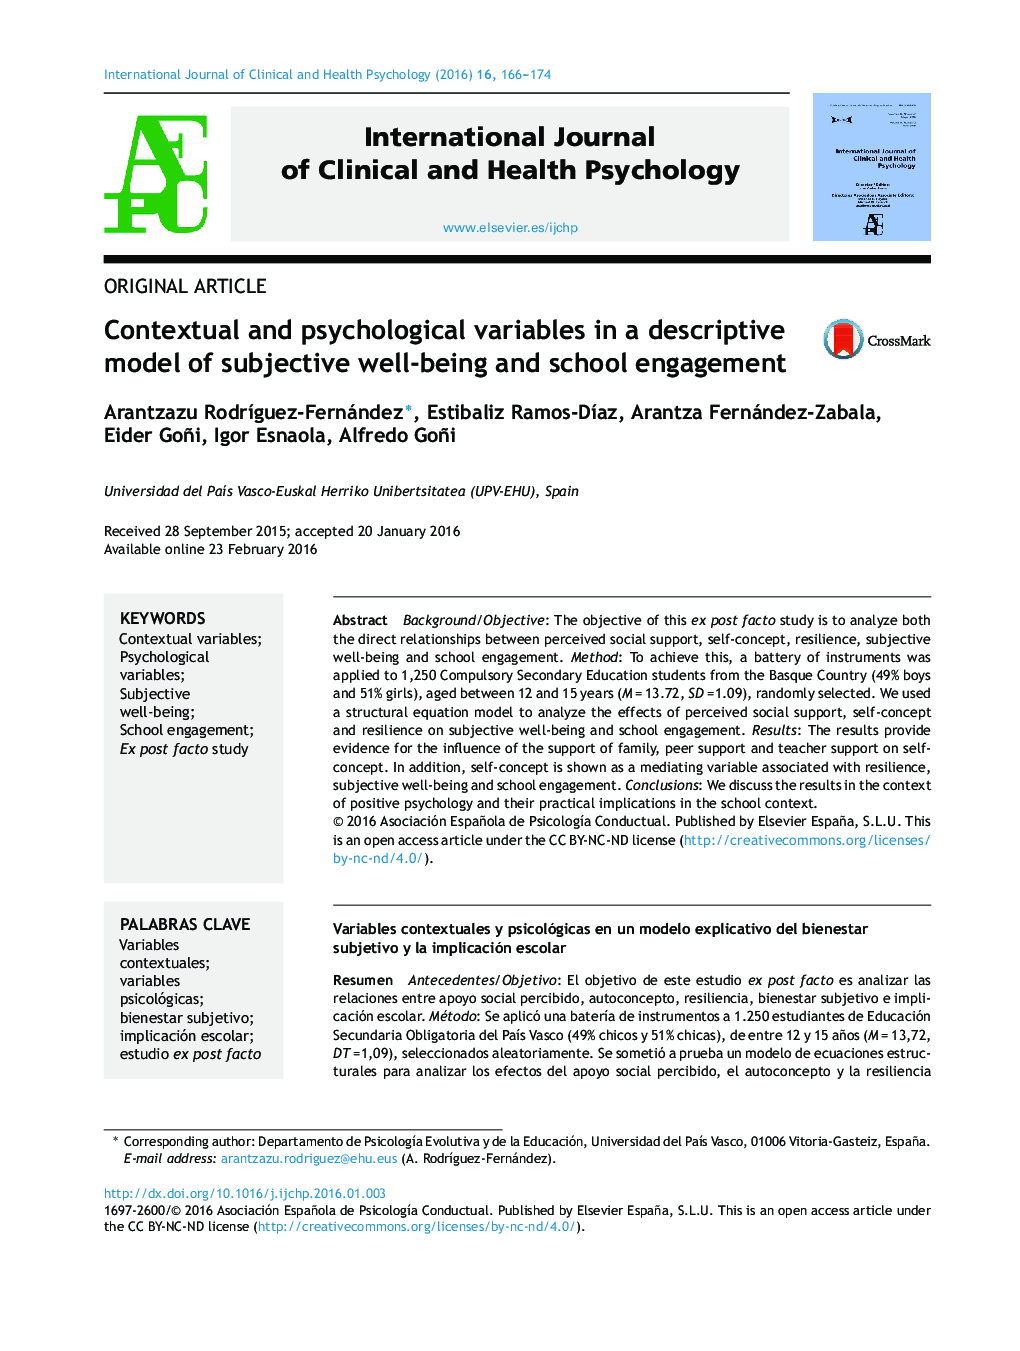 Contextual and psychological variables in a descriptive model of subjective well-being and school engagement